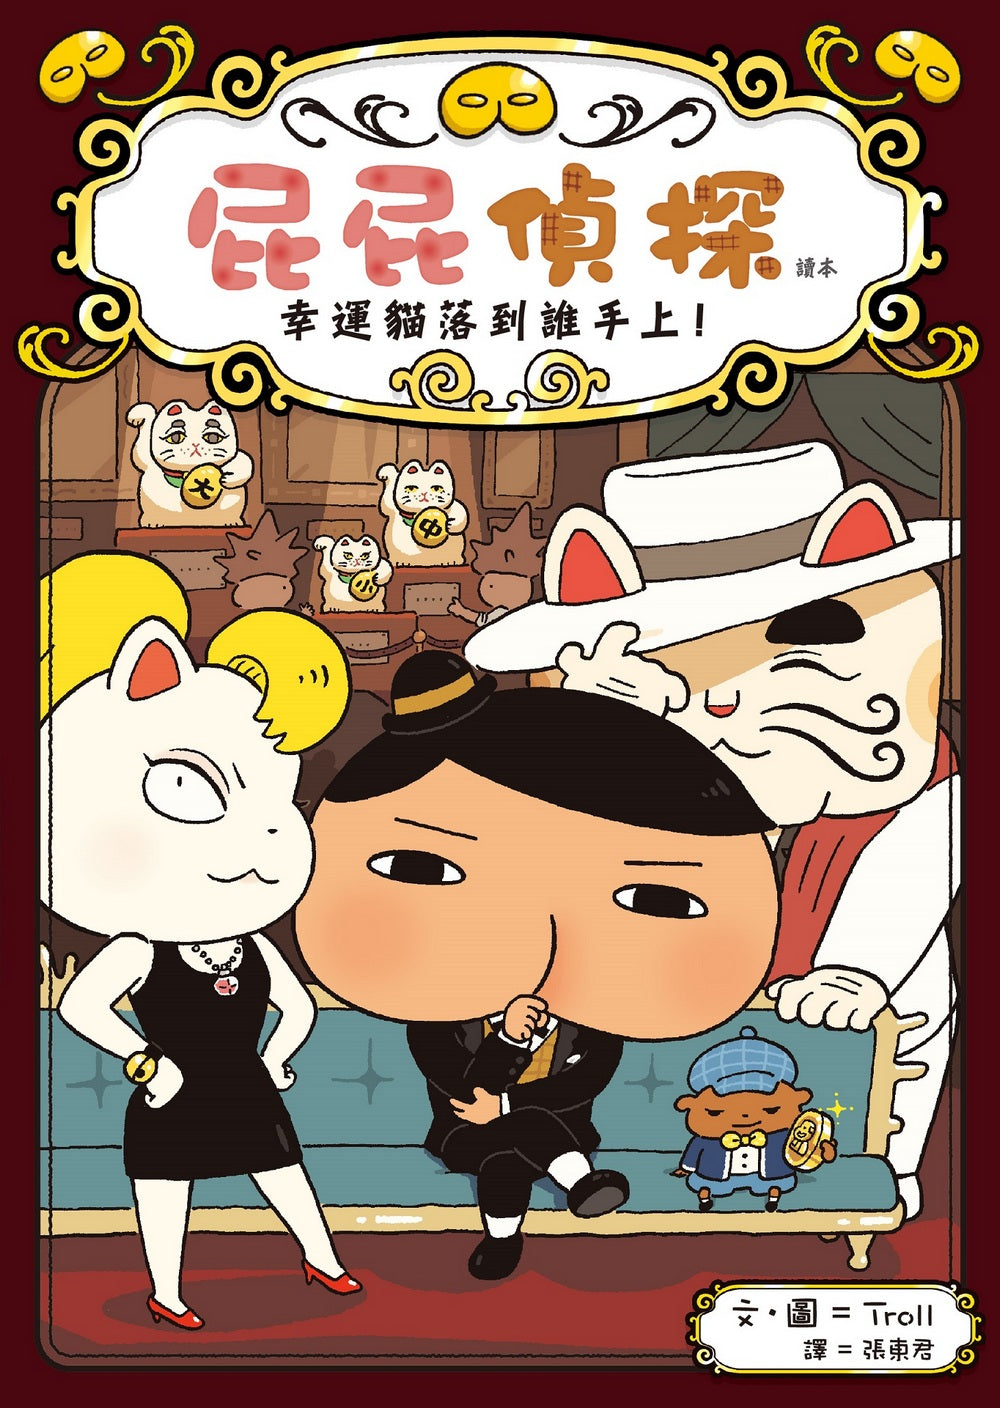 Butt Detective Reader #9: Who Has the Lucky Cat • 屁屁偵探 讀本：幸運貓落到誰手上